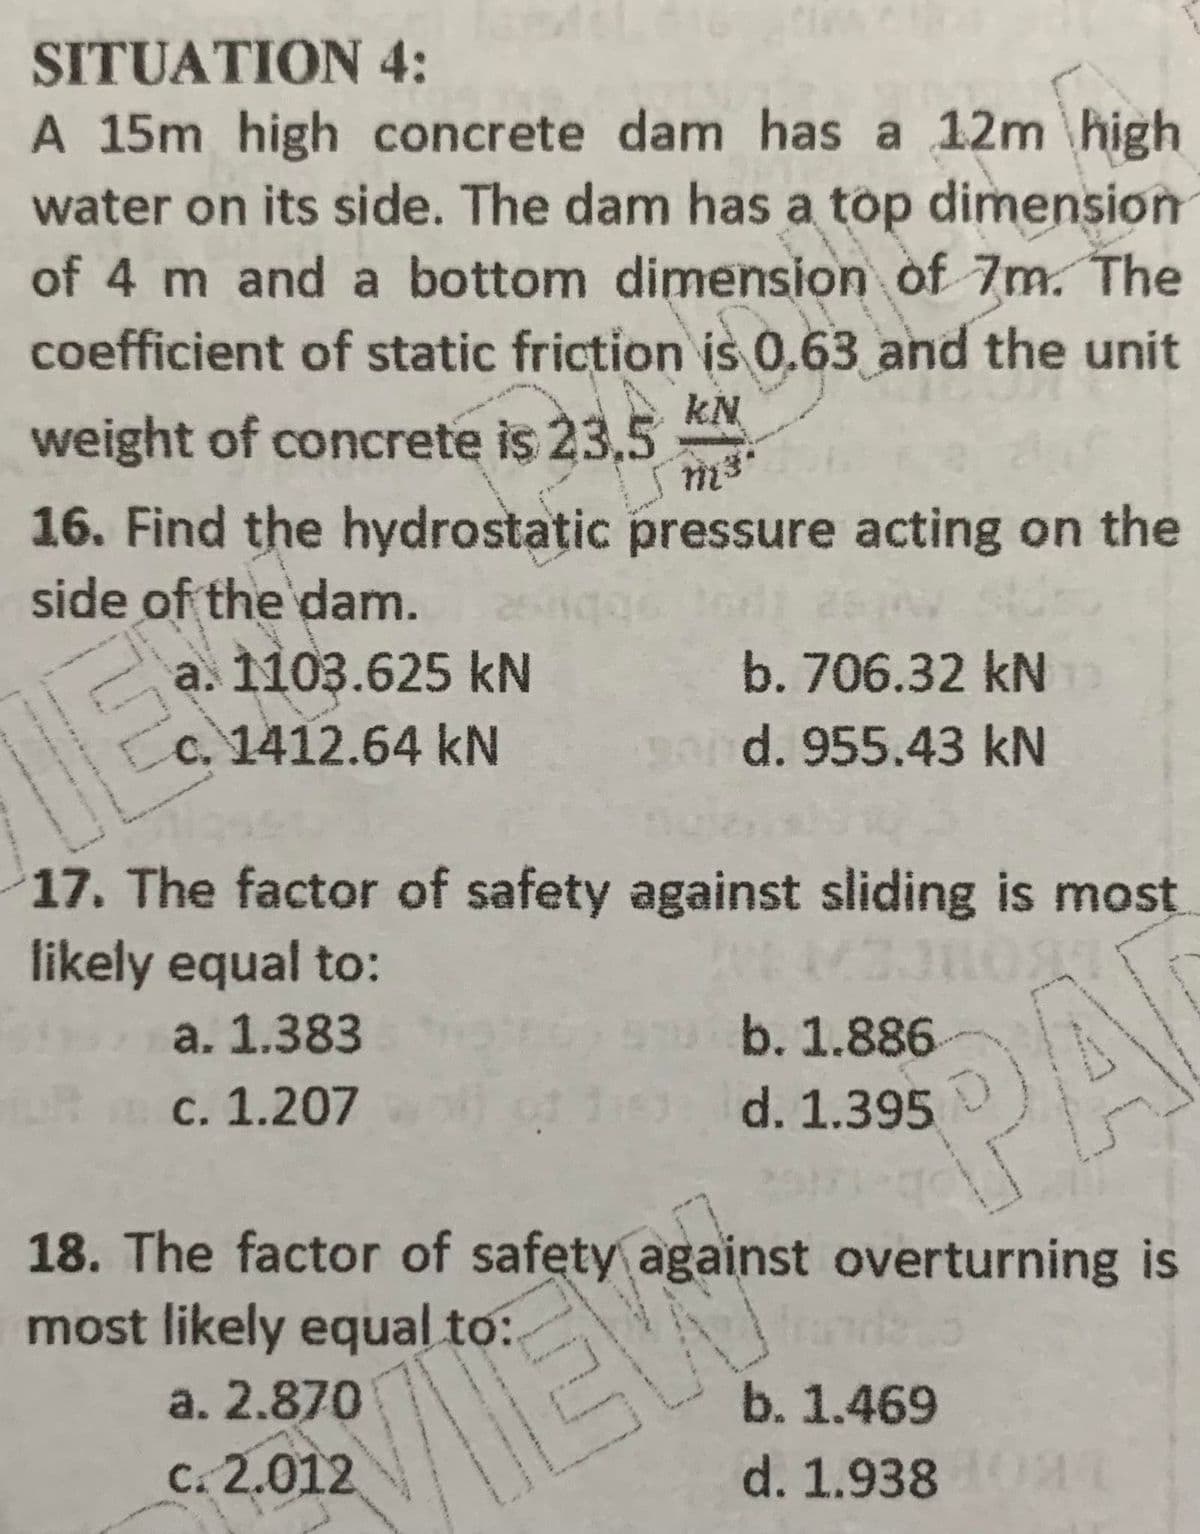 SITUATION 4:
A 15m high concrete dam has a 12m \high
water on its side. The dam has a top dimension
of 4 m and a bottom dimension of 7m. The
coefficient of static friction is 0.63 and the unit
kN
weight of concrete is 23,5
16. Find the hydrostatic pressure acting on the
side of the dam.
a. 1103.625 kN
c. 1412.64 kN
196
b. 706.32 kN
pod. 955.43 kN
17. The factor of safety against sliding is most
likely equal to:
a. 1.383
b. 1.886
PAI
c. 1.207
d. 1.395
18. The factor of safety against overturning is
most likely equal to:
a. 2.870
b. 1.469
C. 2.012
d. 1.9380L
